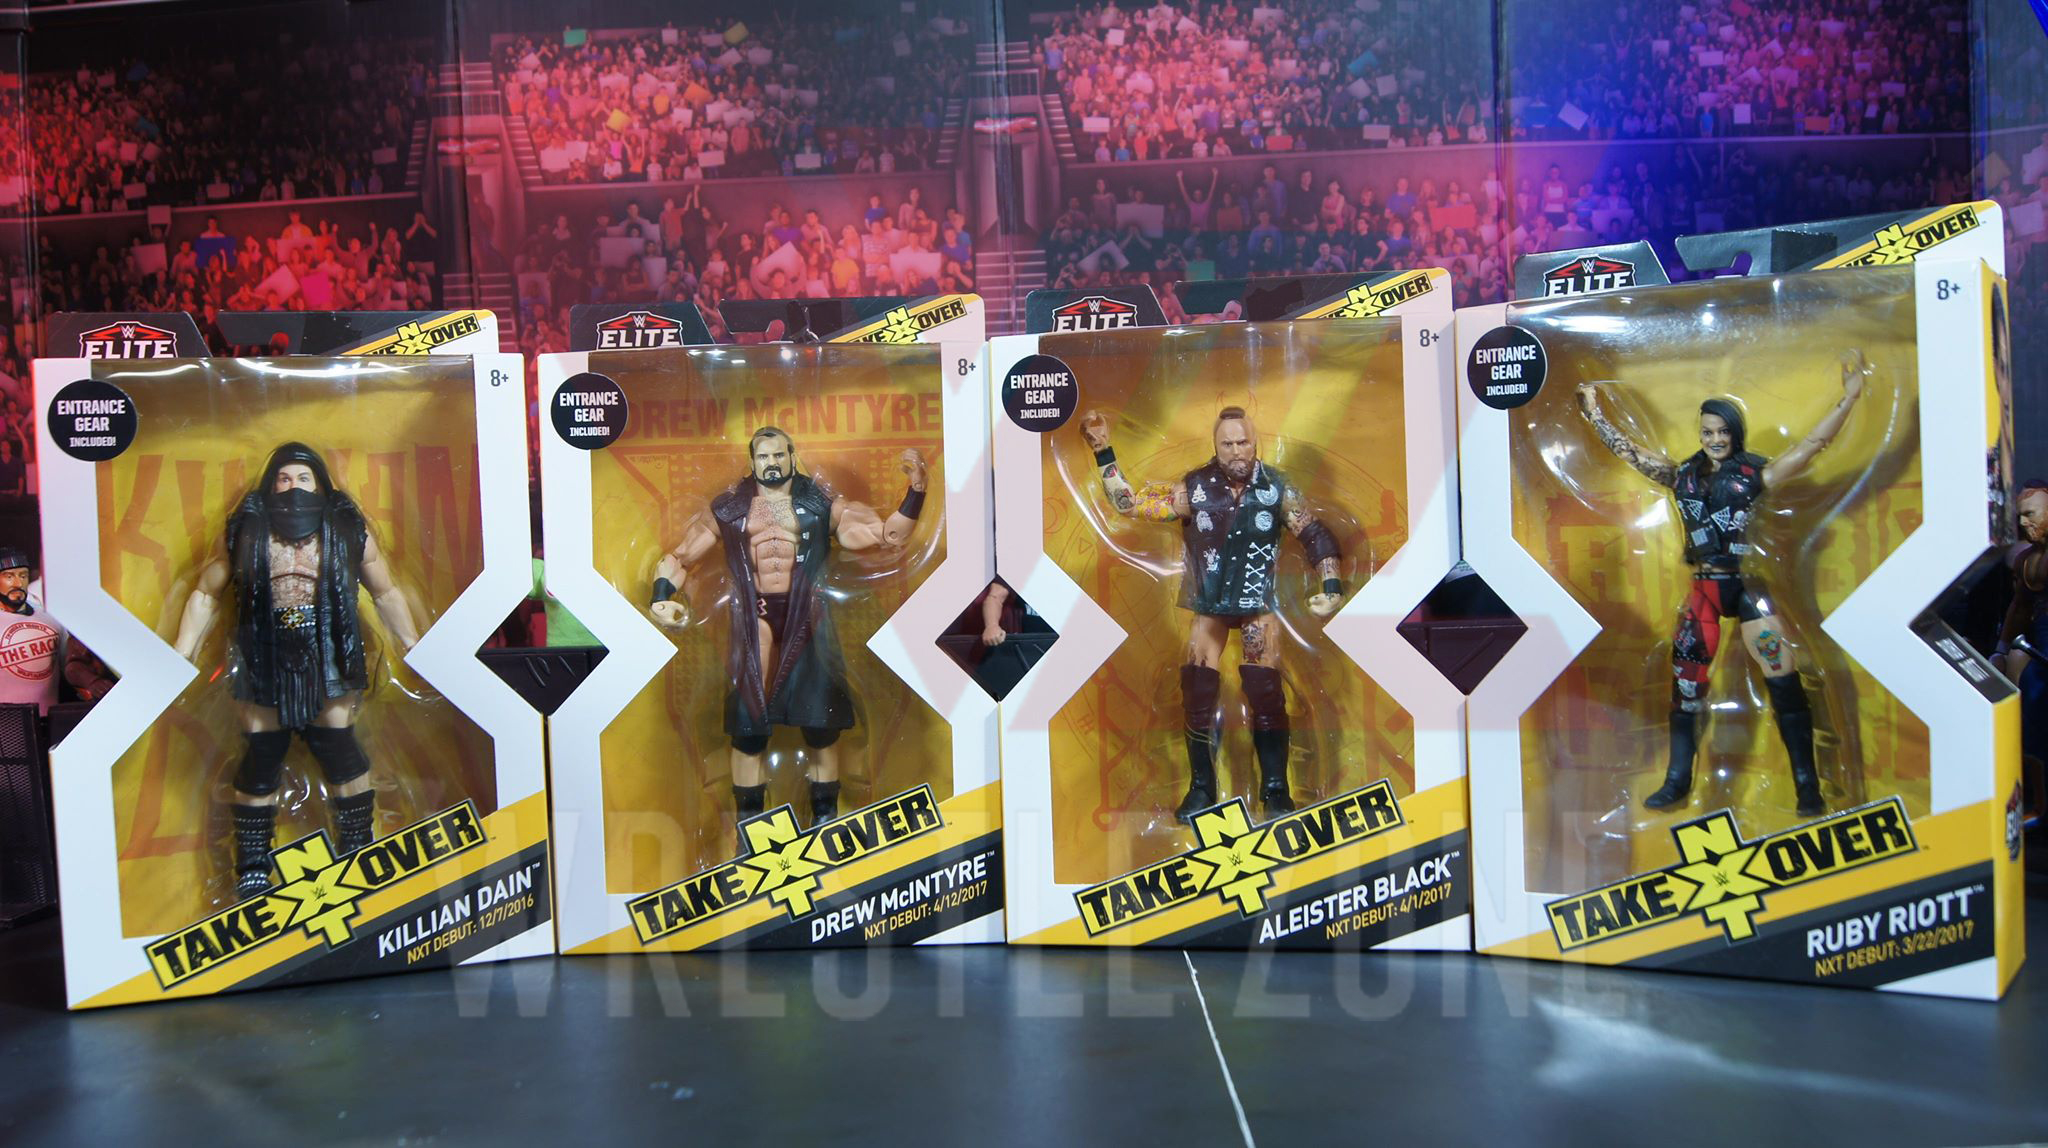 Wwe_nxt_takeover_4 1